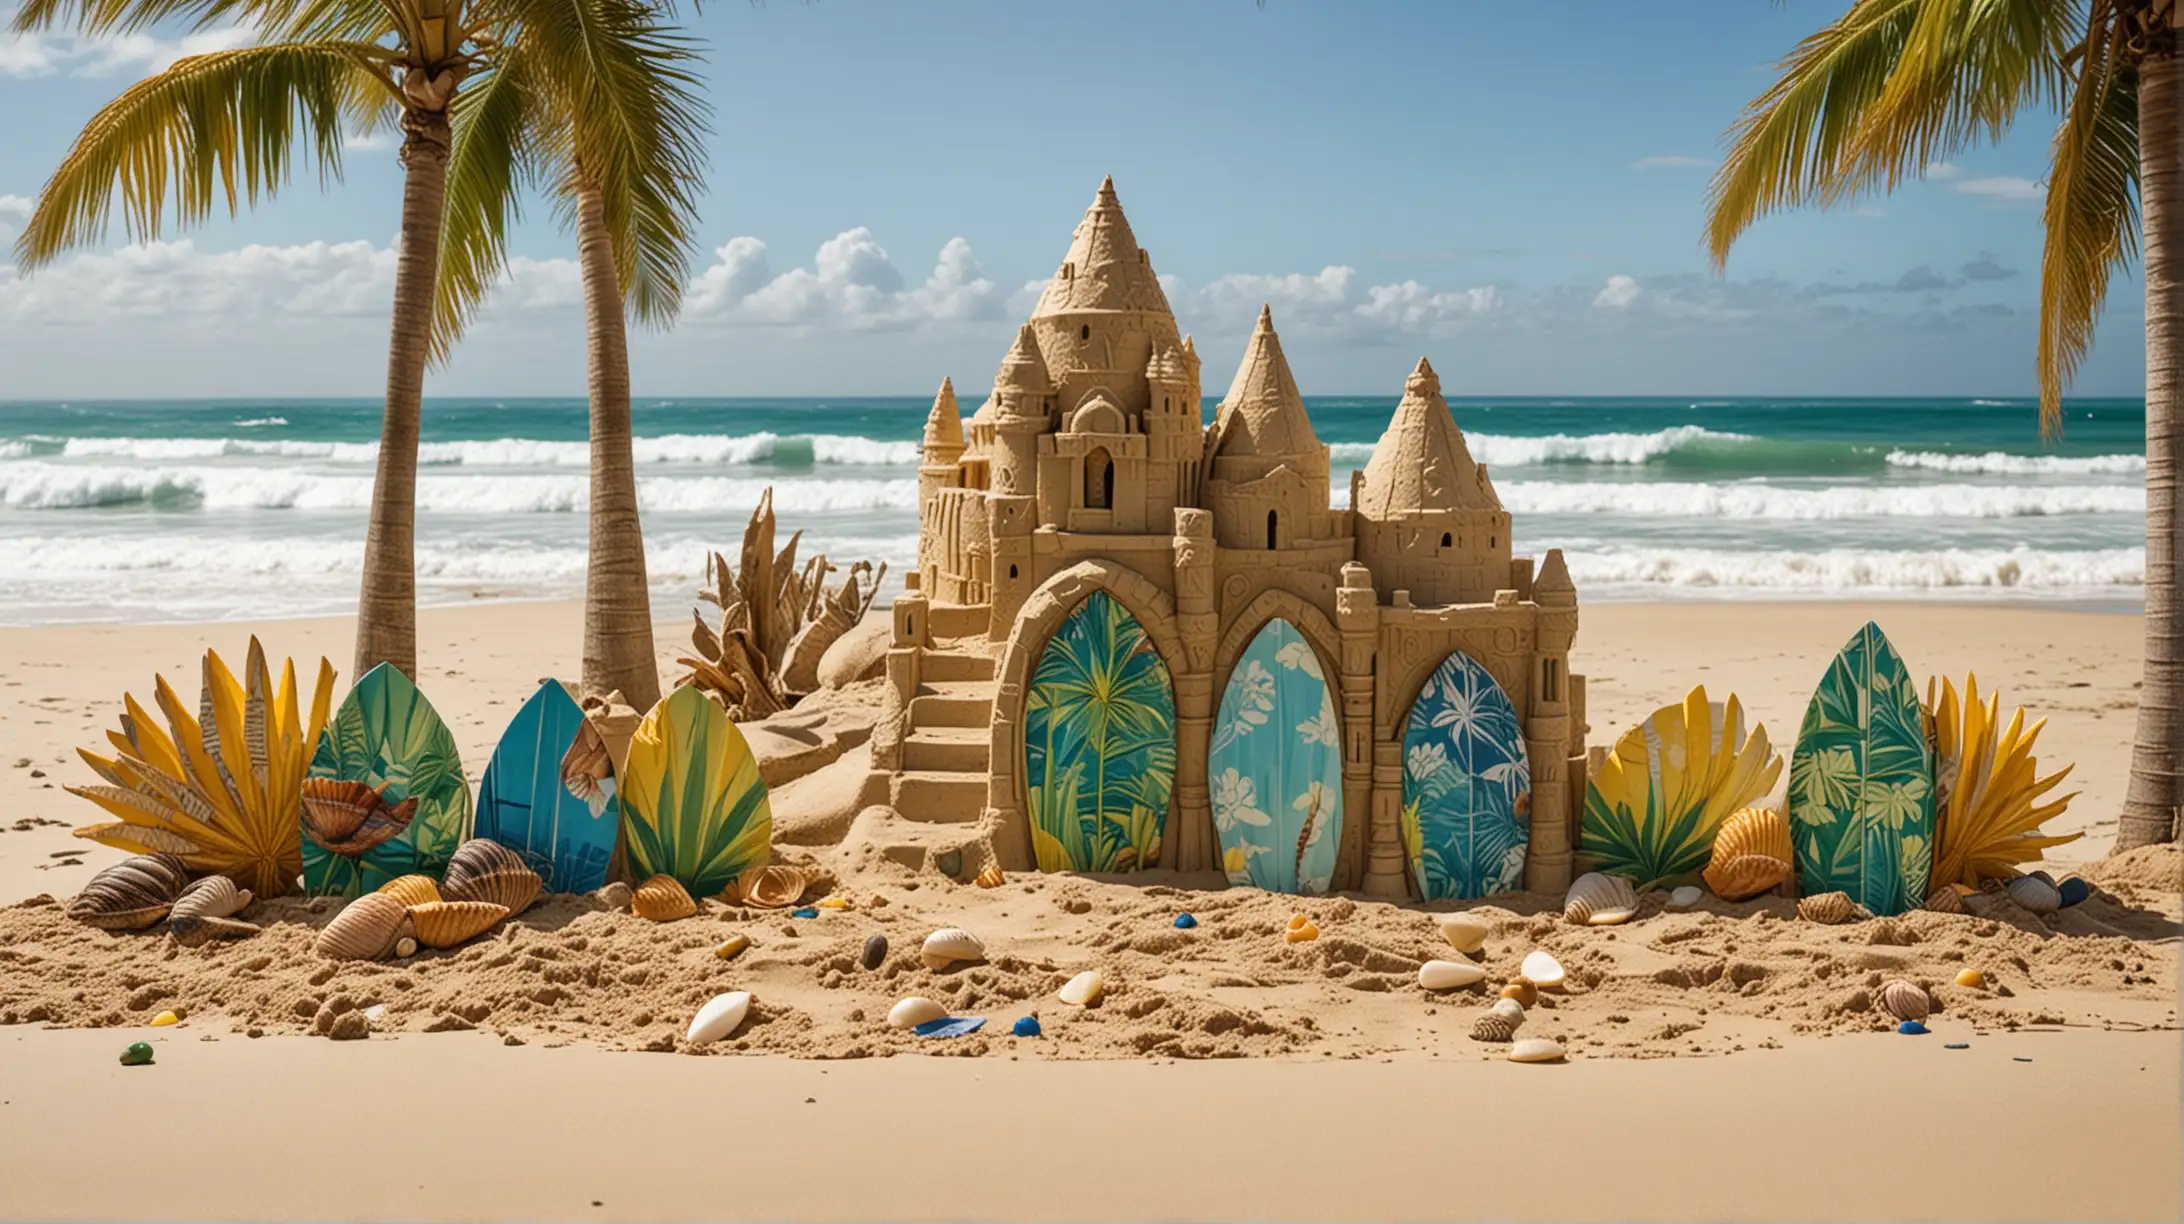 Beach Scene with Sunshades Surf Boards Sand Castle and Sea Shells